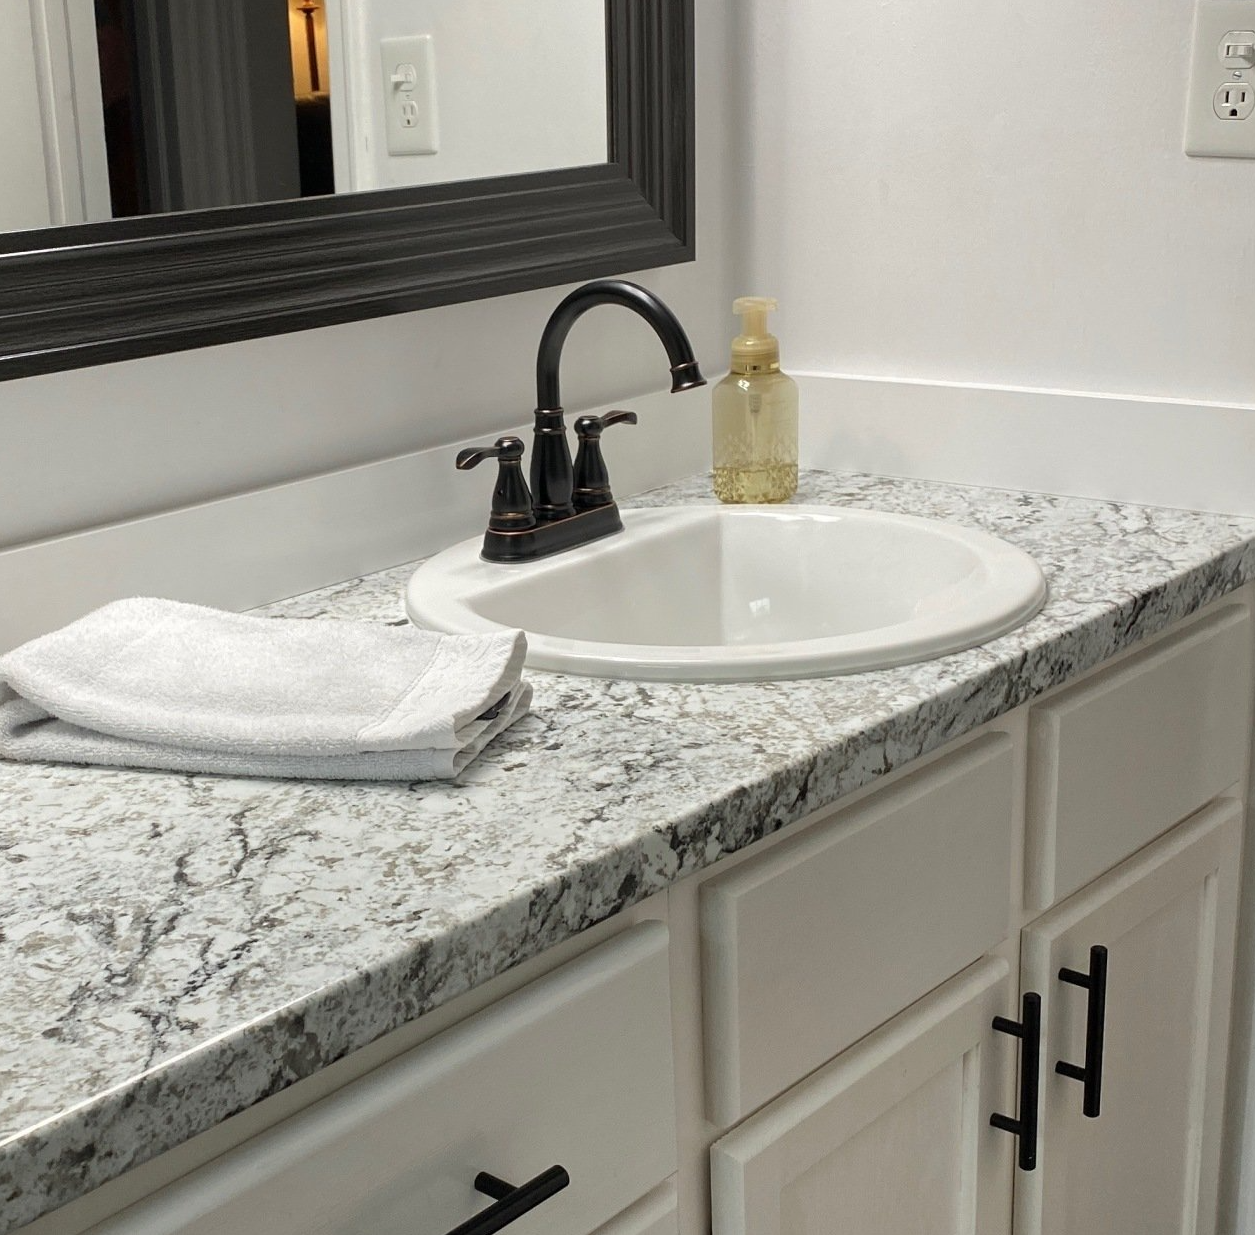 Bath remodel with sink, countertops and more